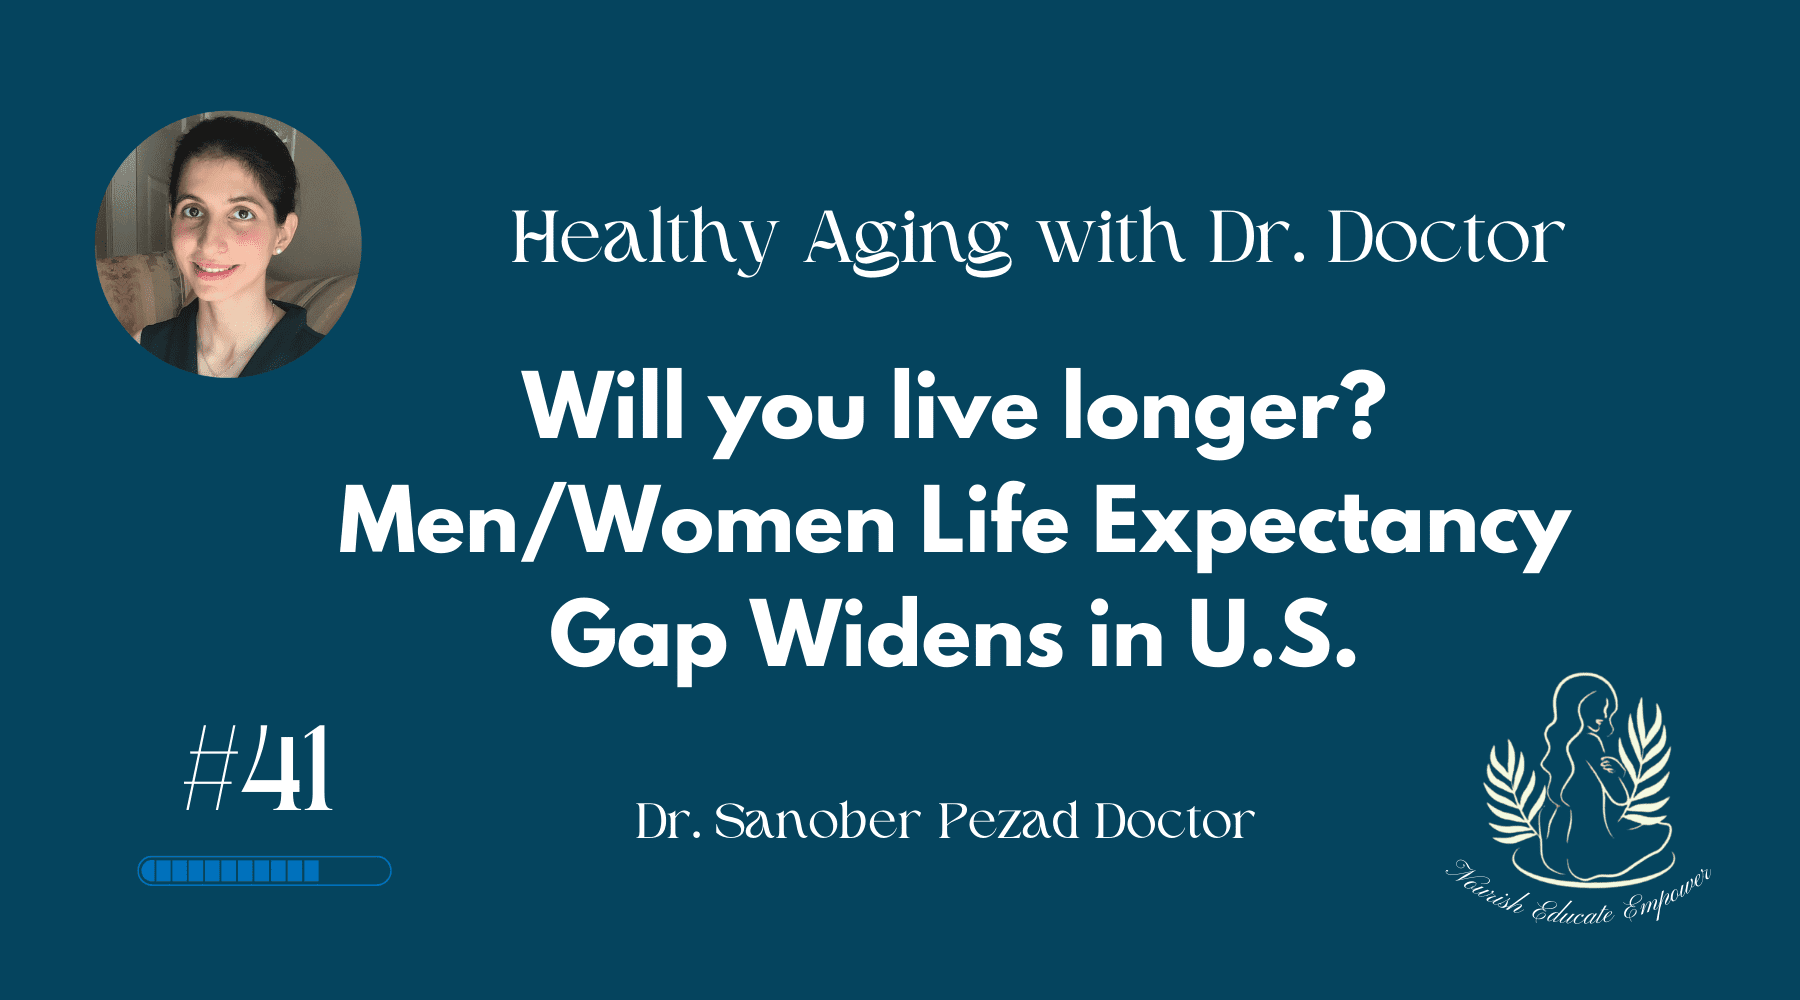 Healthy Aging with Dr. Doctor Newsletter- Will you live longer? Men/Women Life Expectancy Gap Widens in U.S.- Dr. Sanober Doctor